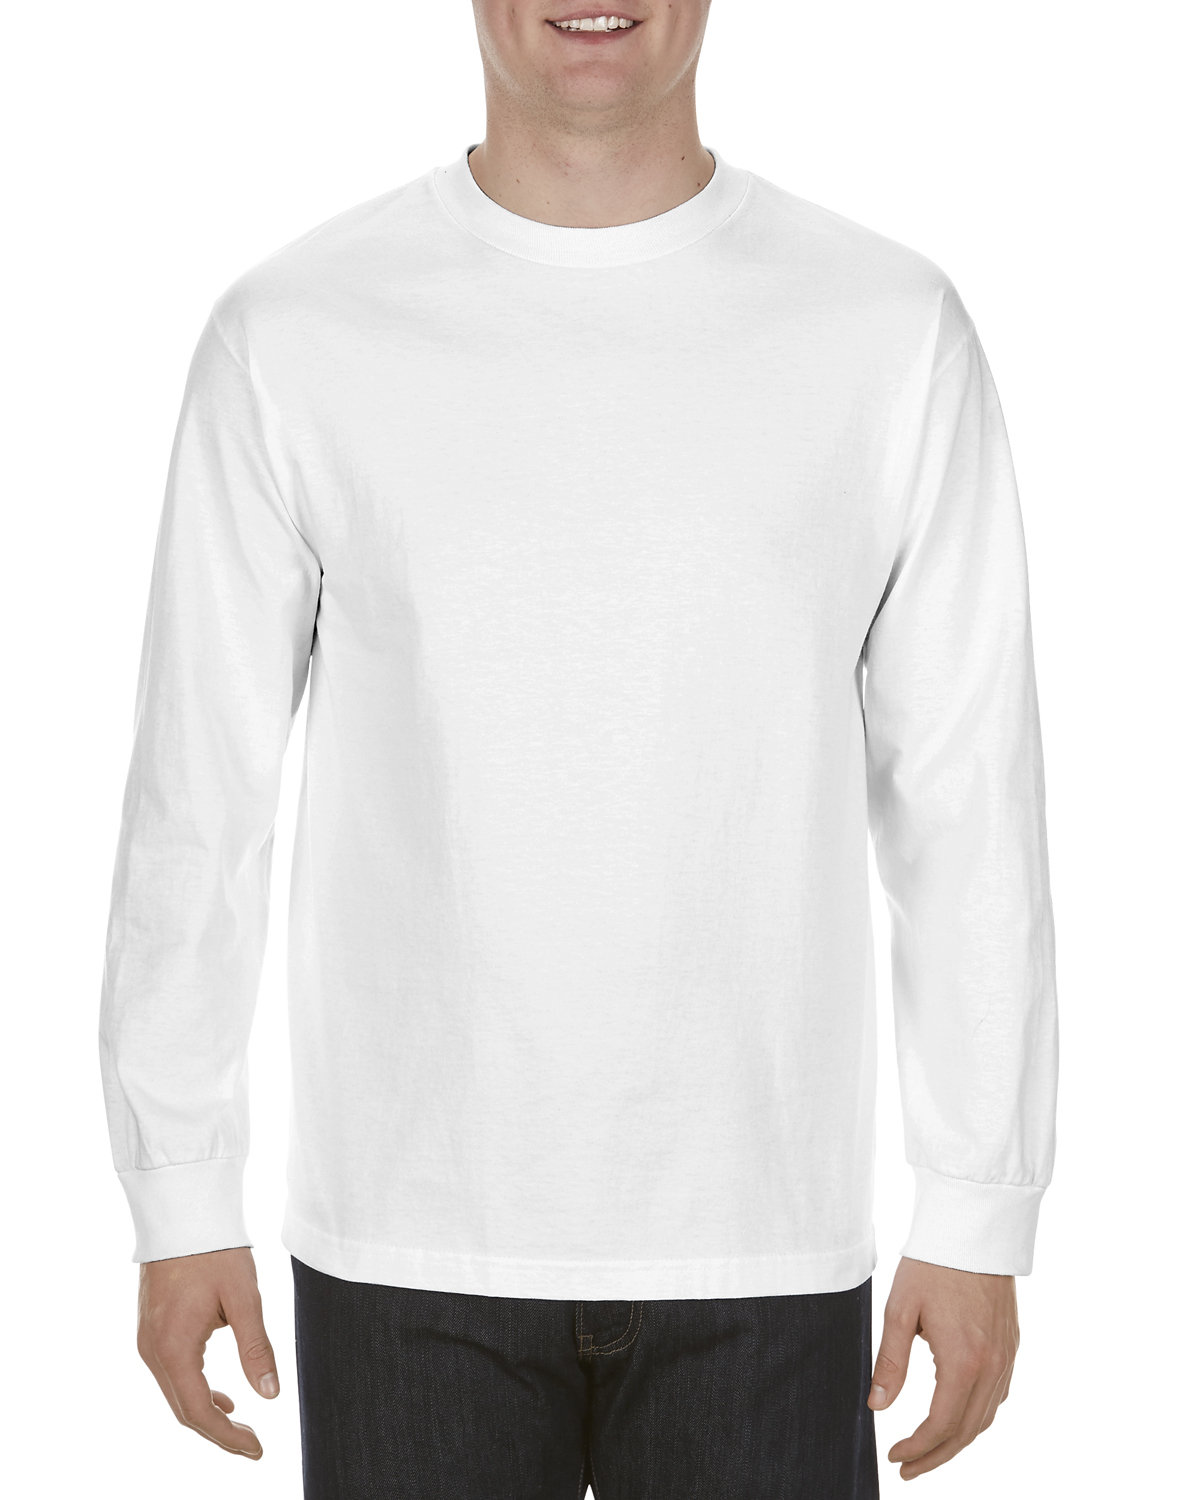 American Apparel Adult Long-Sleeve T-Shirt white 